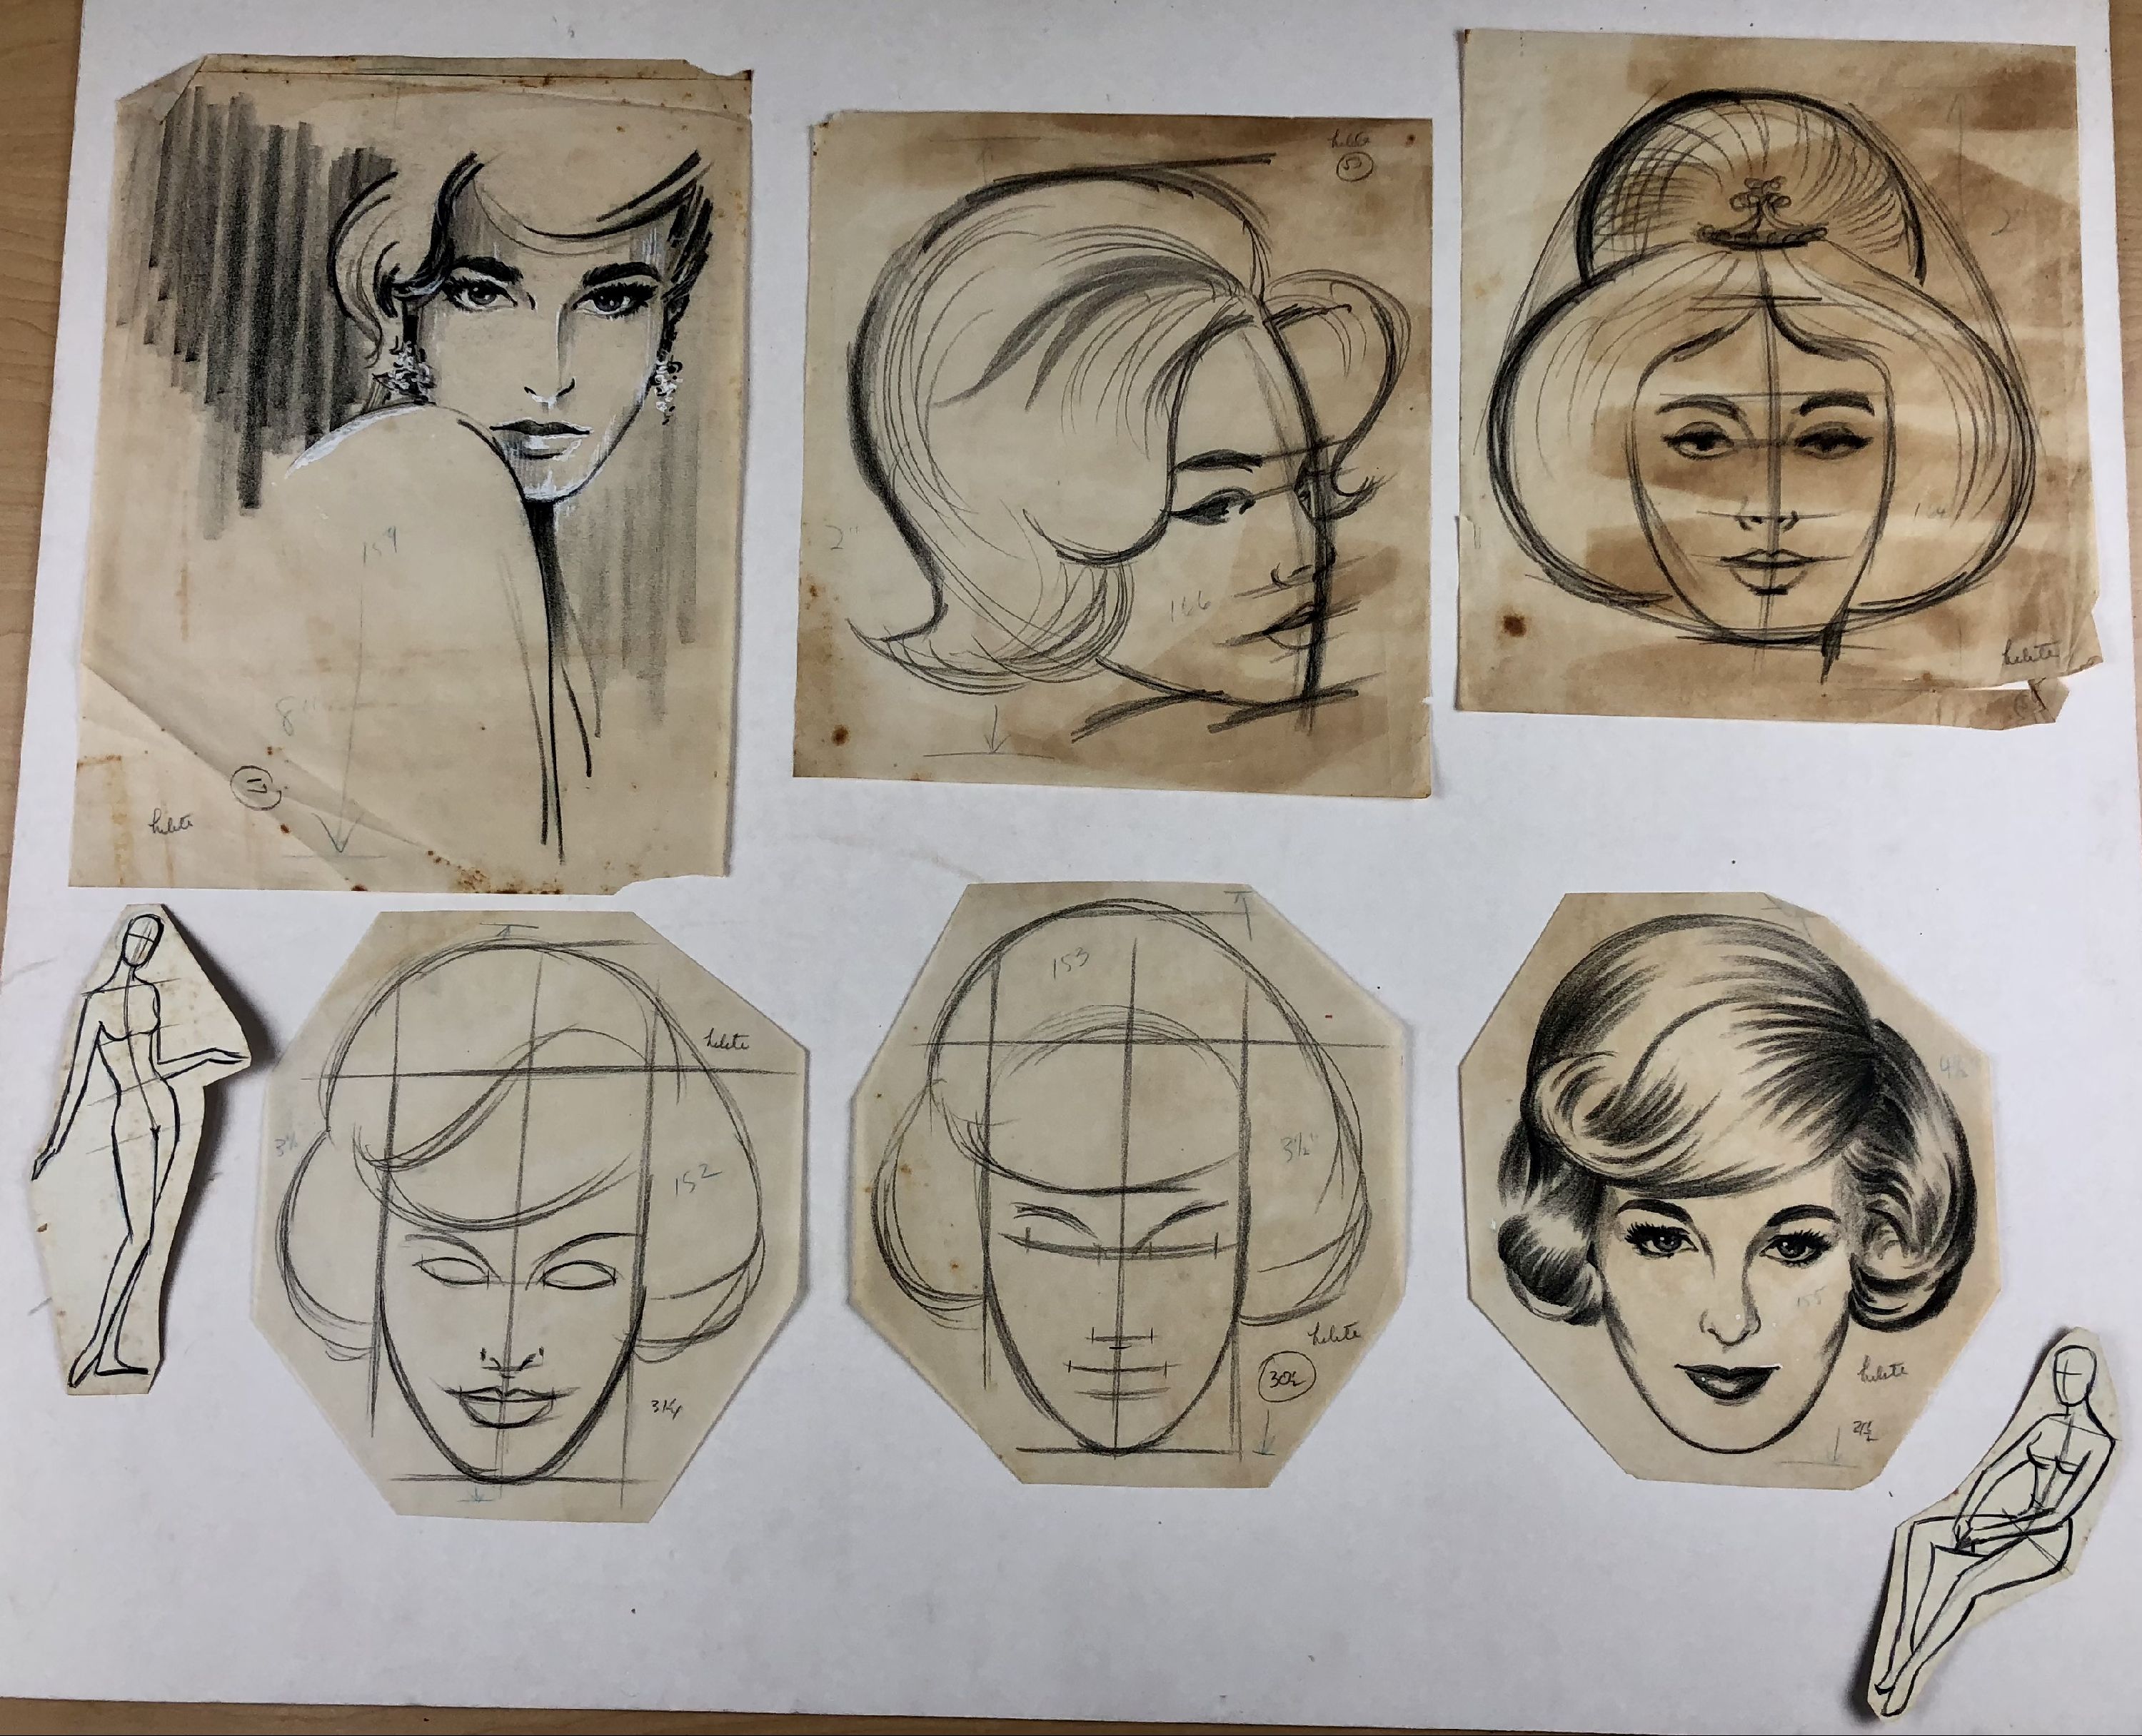 group of 8 cutouts of charcoal sketches - 6 featuring woman's head and profile, and 2 basic full-length figure studies